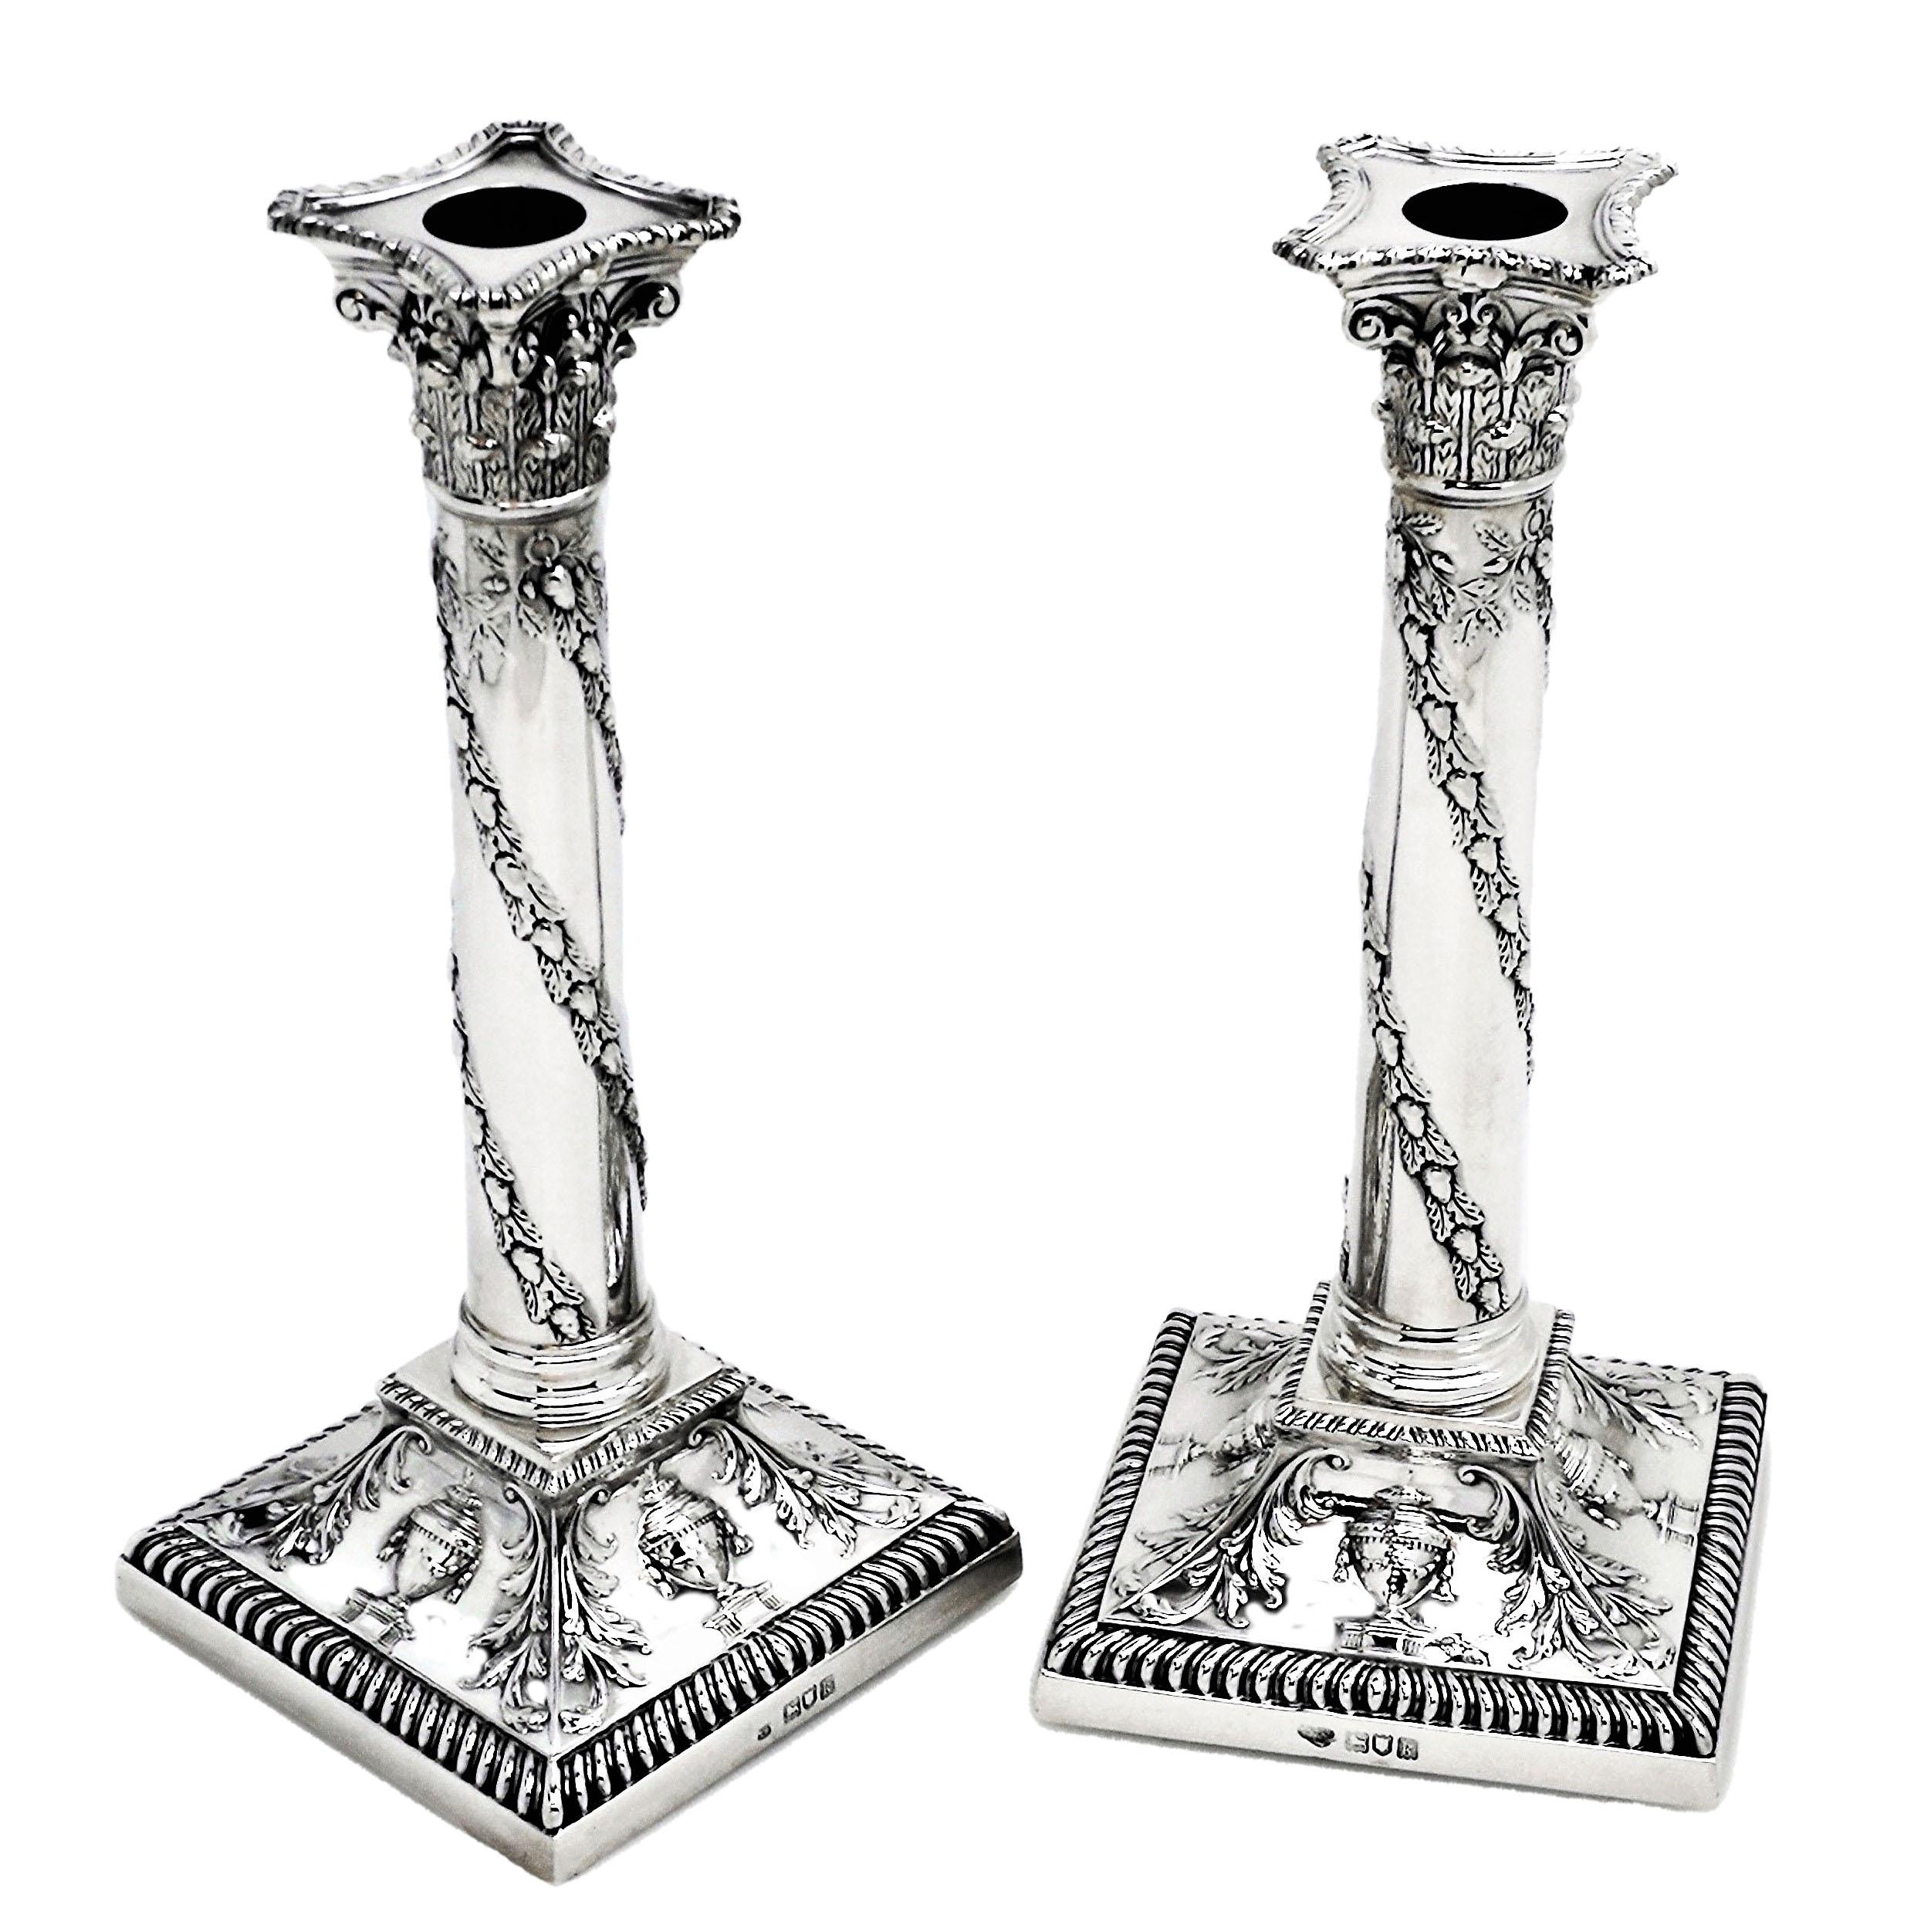 A pair of Antique Sterling Silver Candlesticks with acanthus leaf covered classic Corinthian style capitals above a column wrapped in acorn covered vines. The base of the Candlesticks feature a concave shape embellished with classical urns